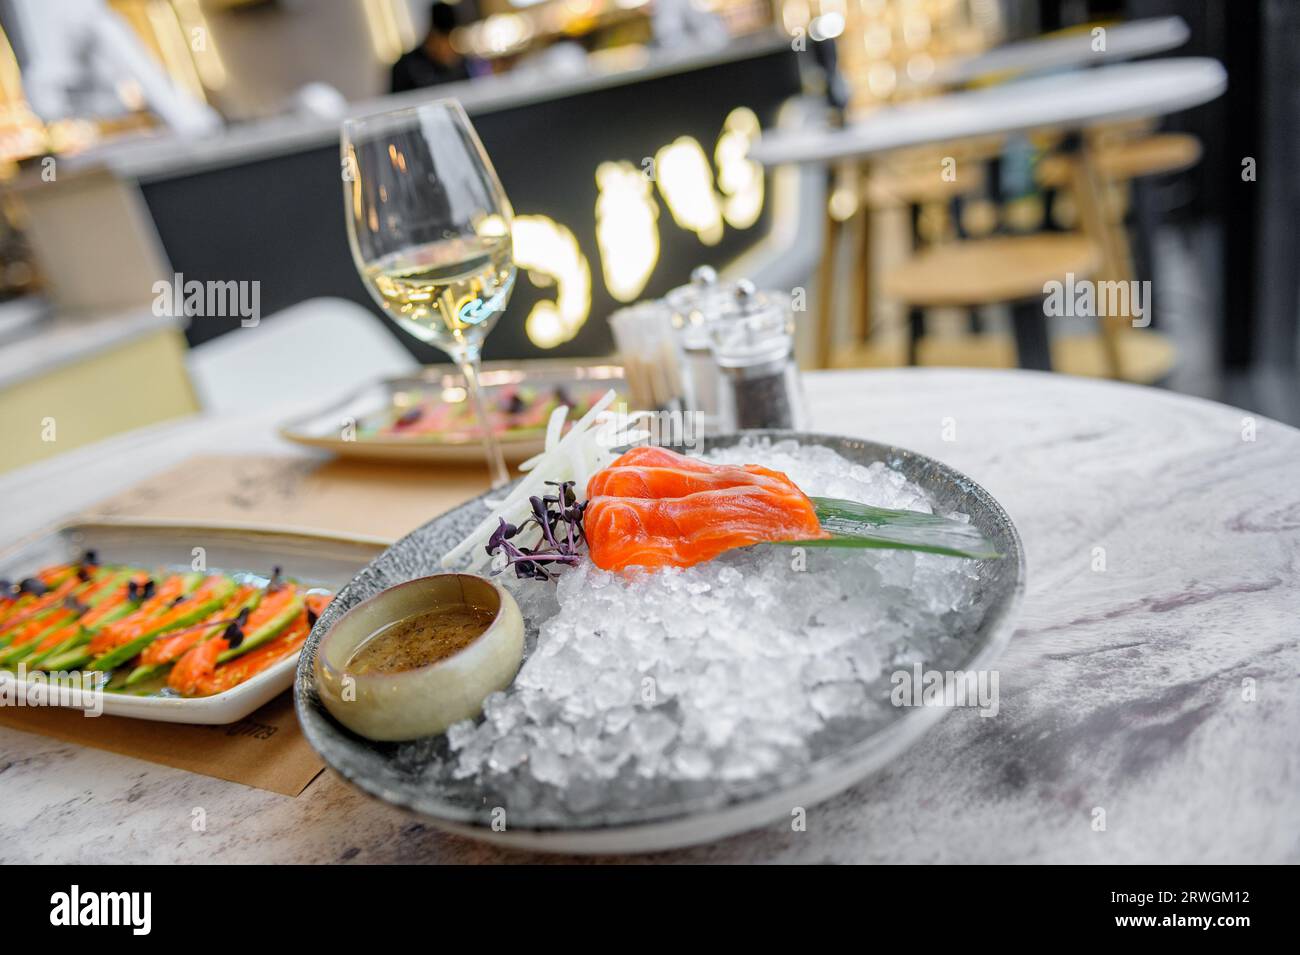 Salmon sashimi plate with sauce and ice on a marble table in a restaurant Stock Photo